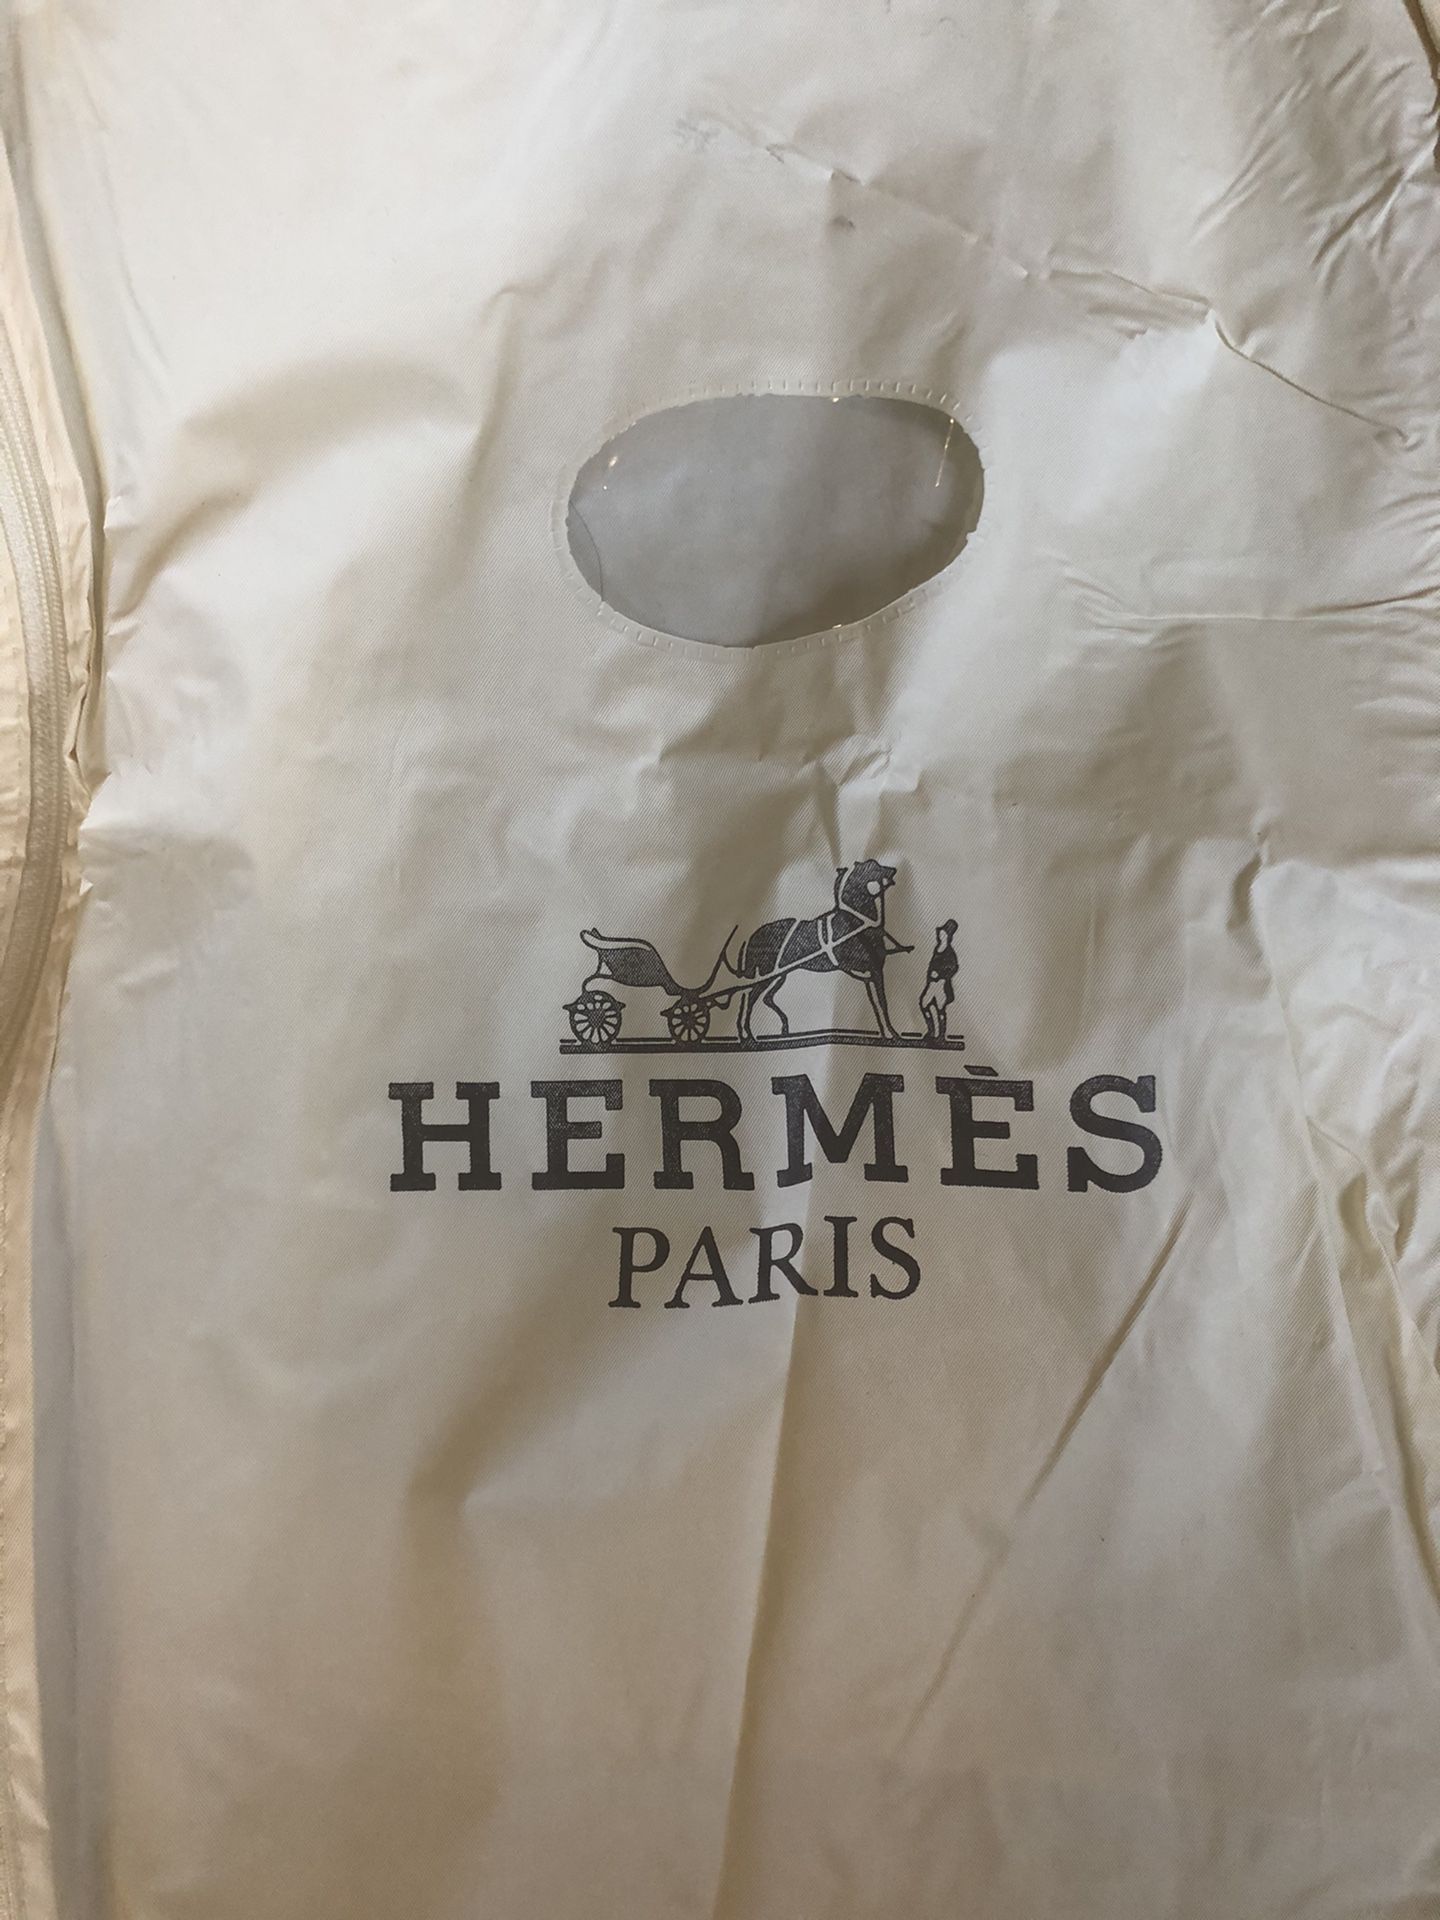 Authentic Hermès garment bag. Great condition. Protects high end garments. $66